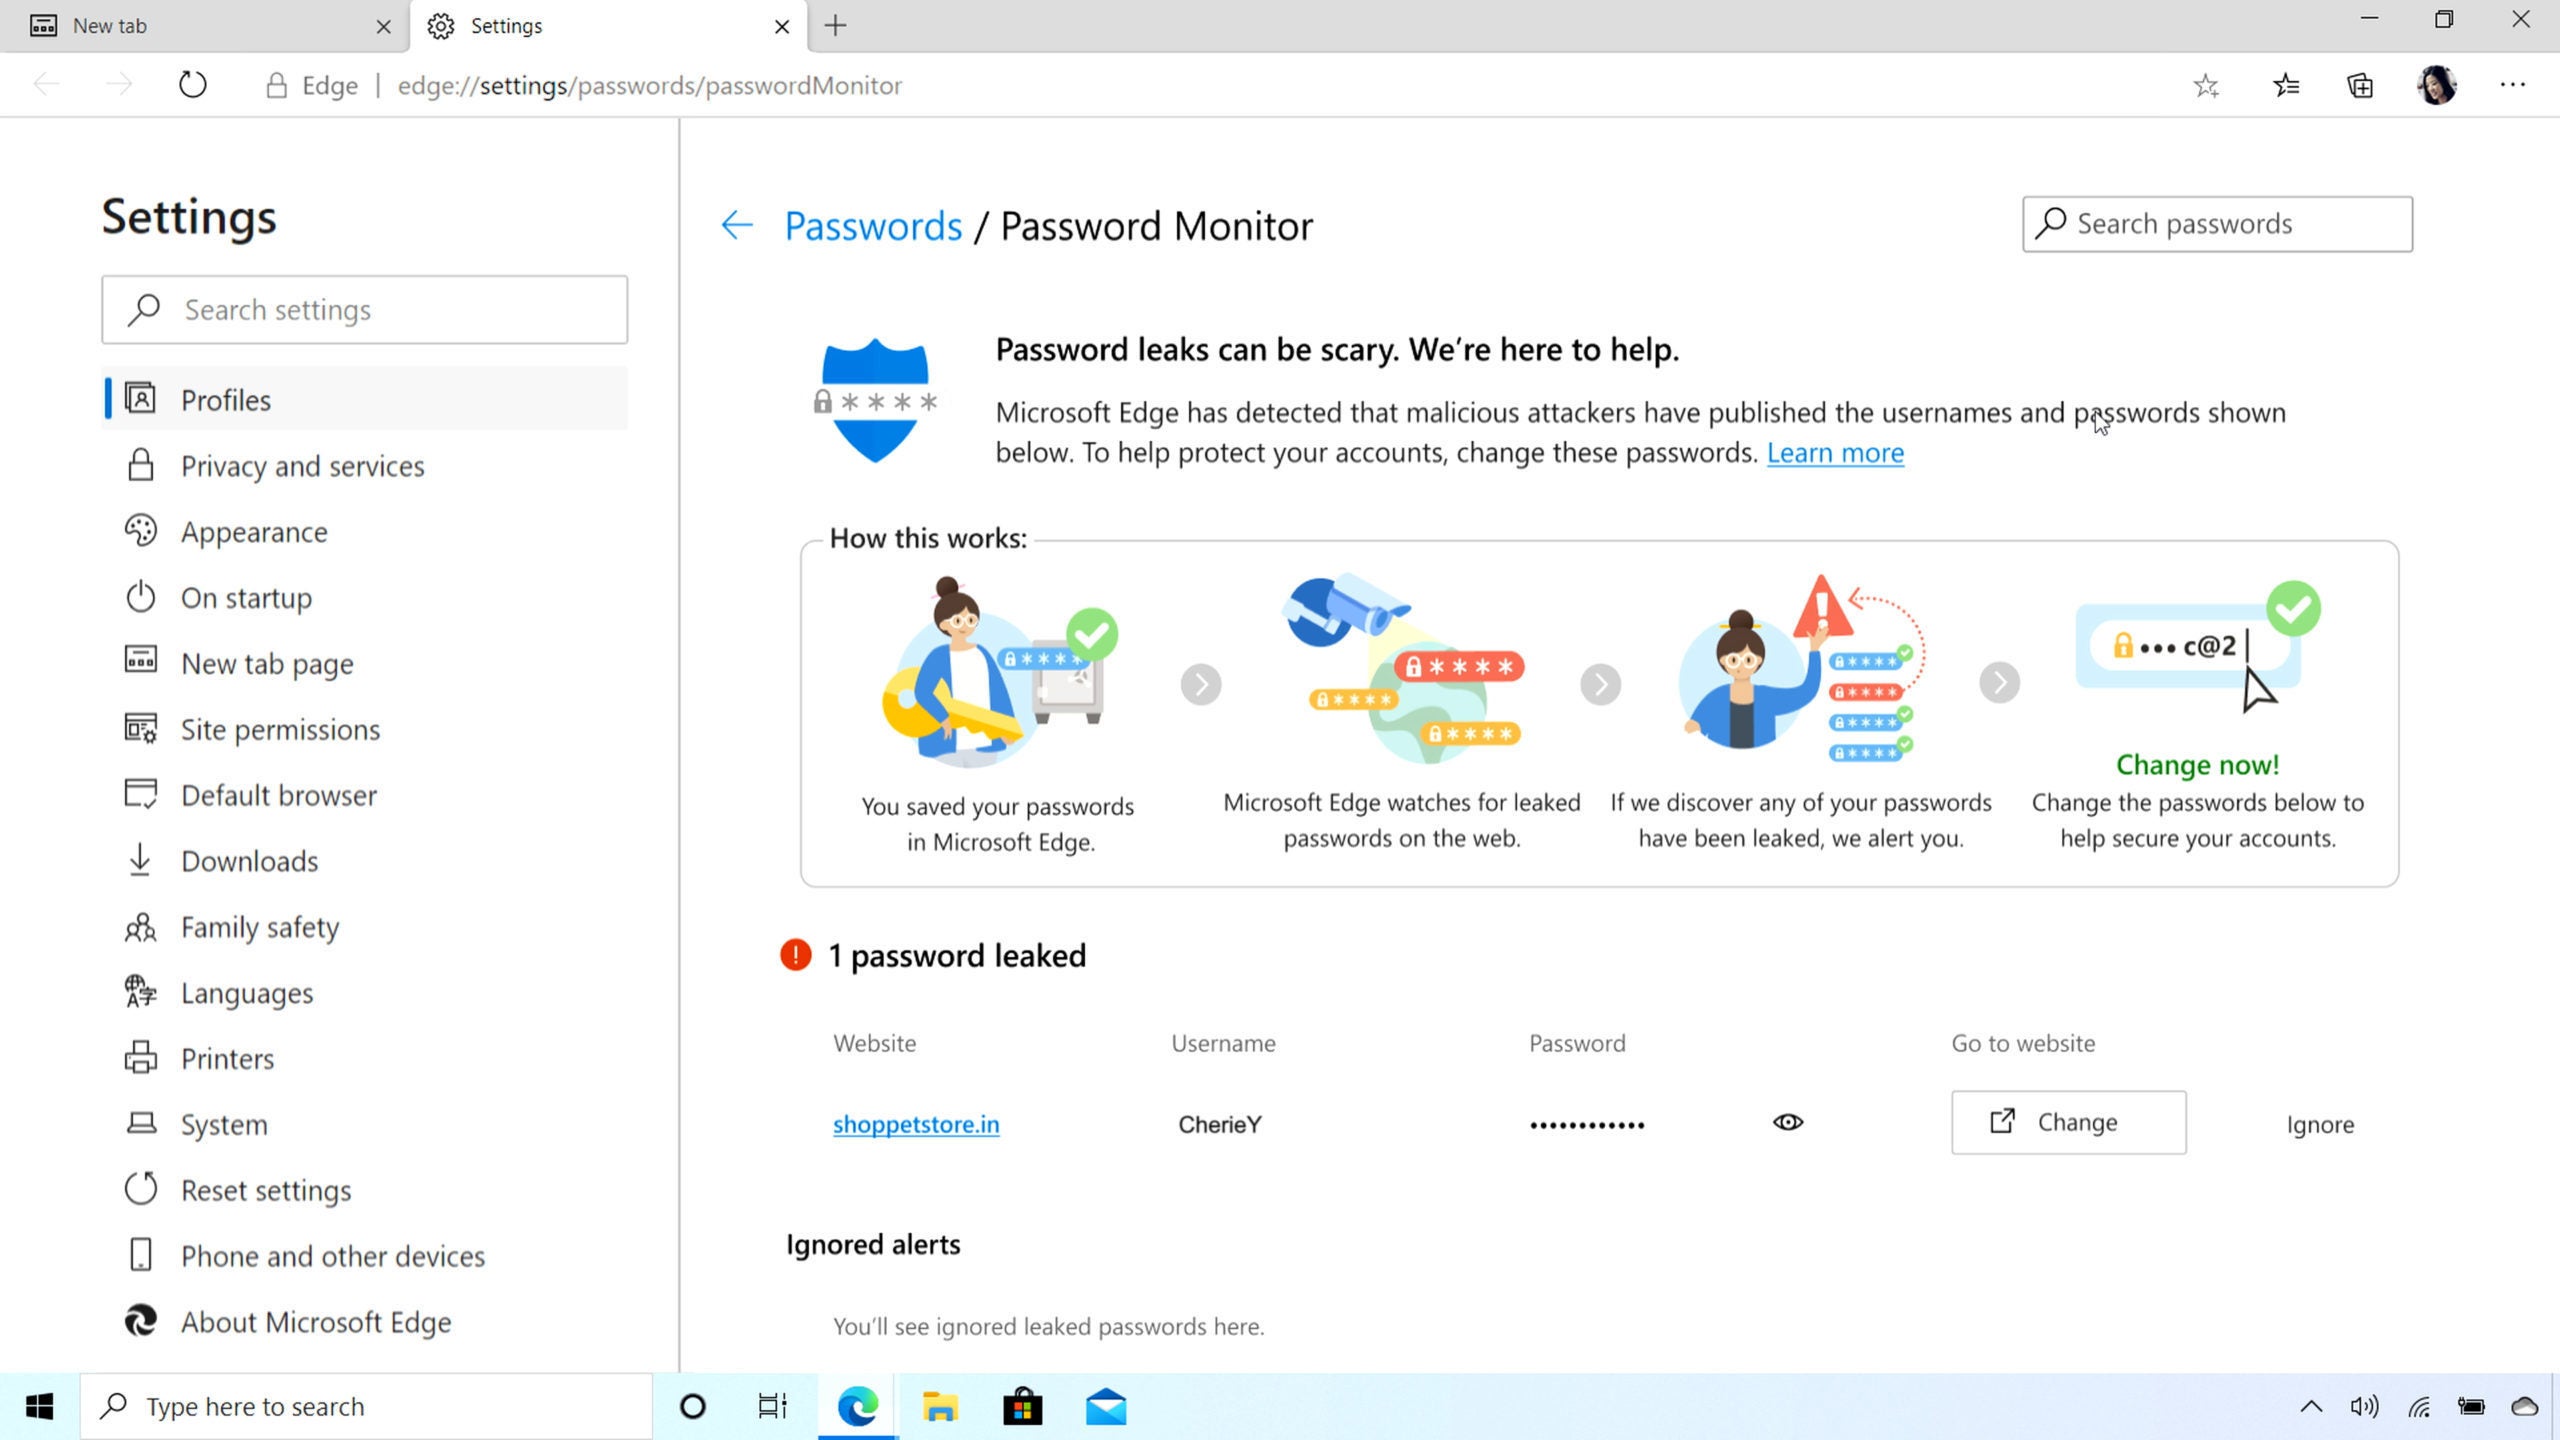 microsoft edge could not access the download directory